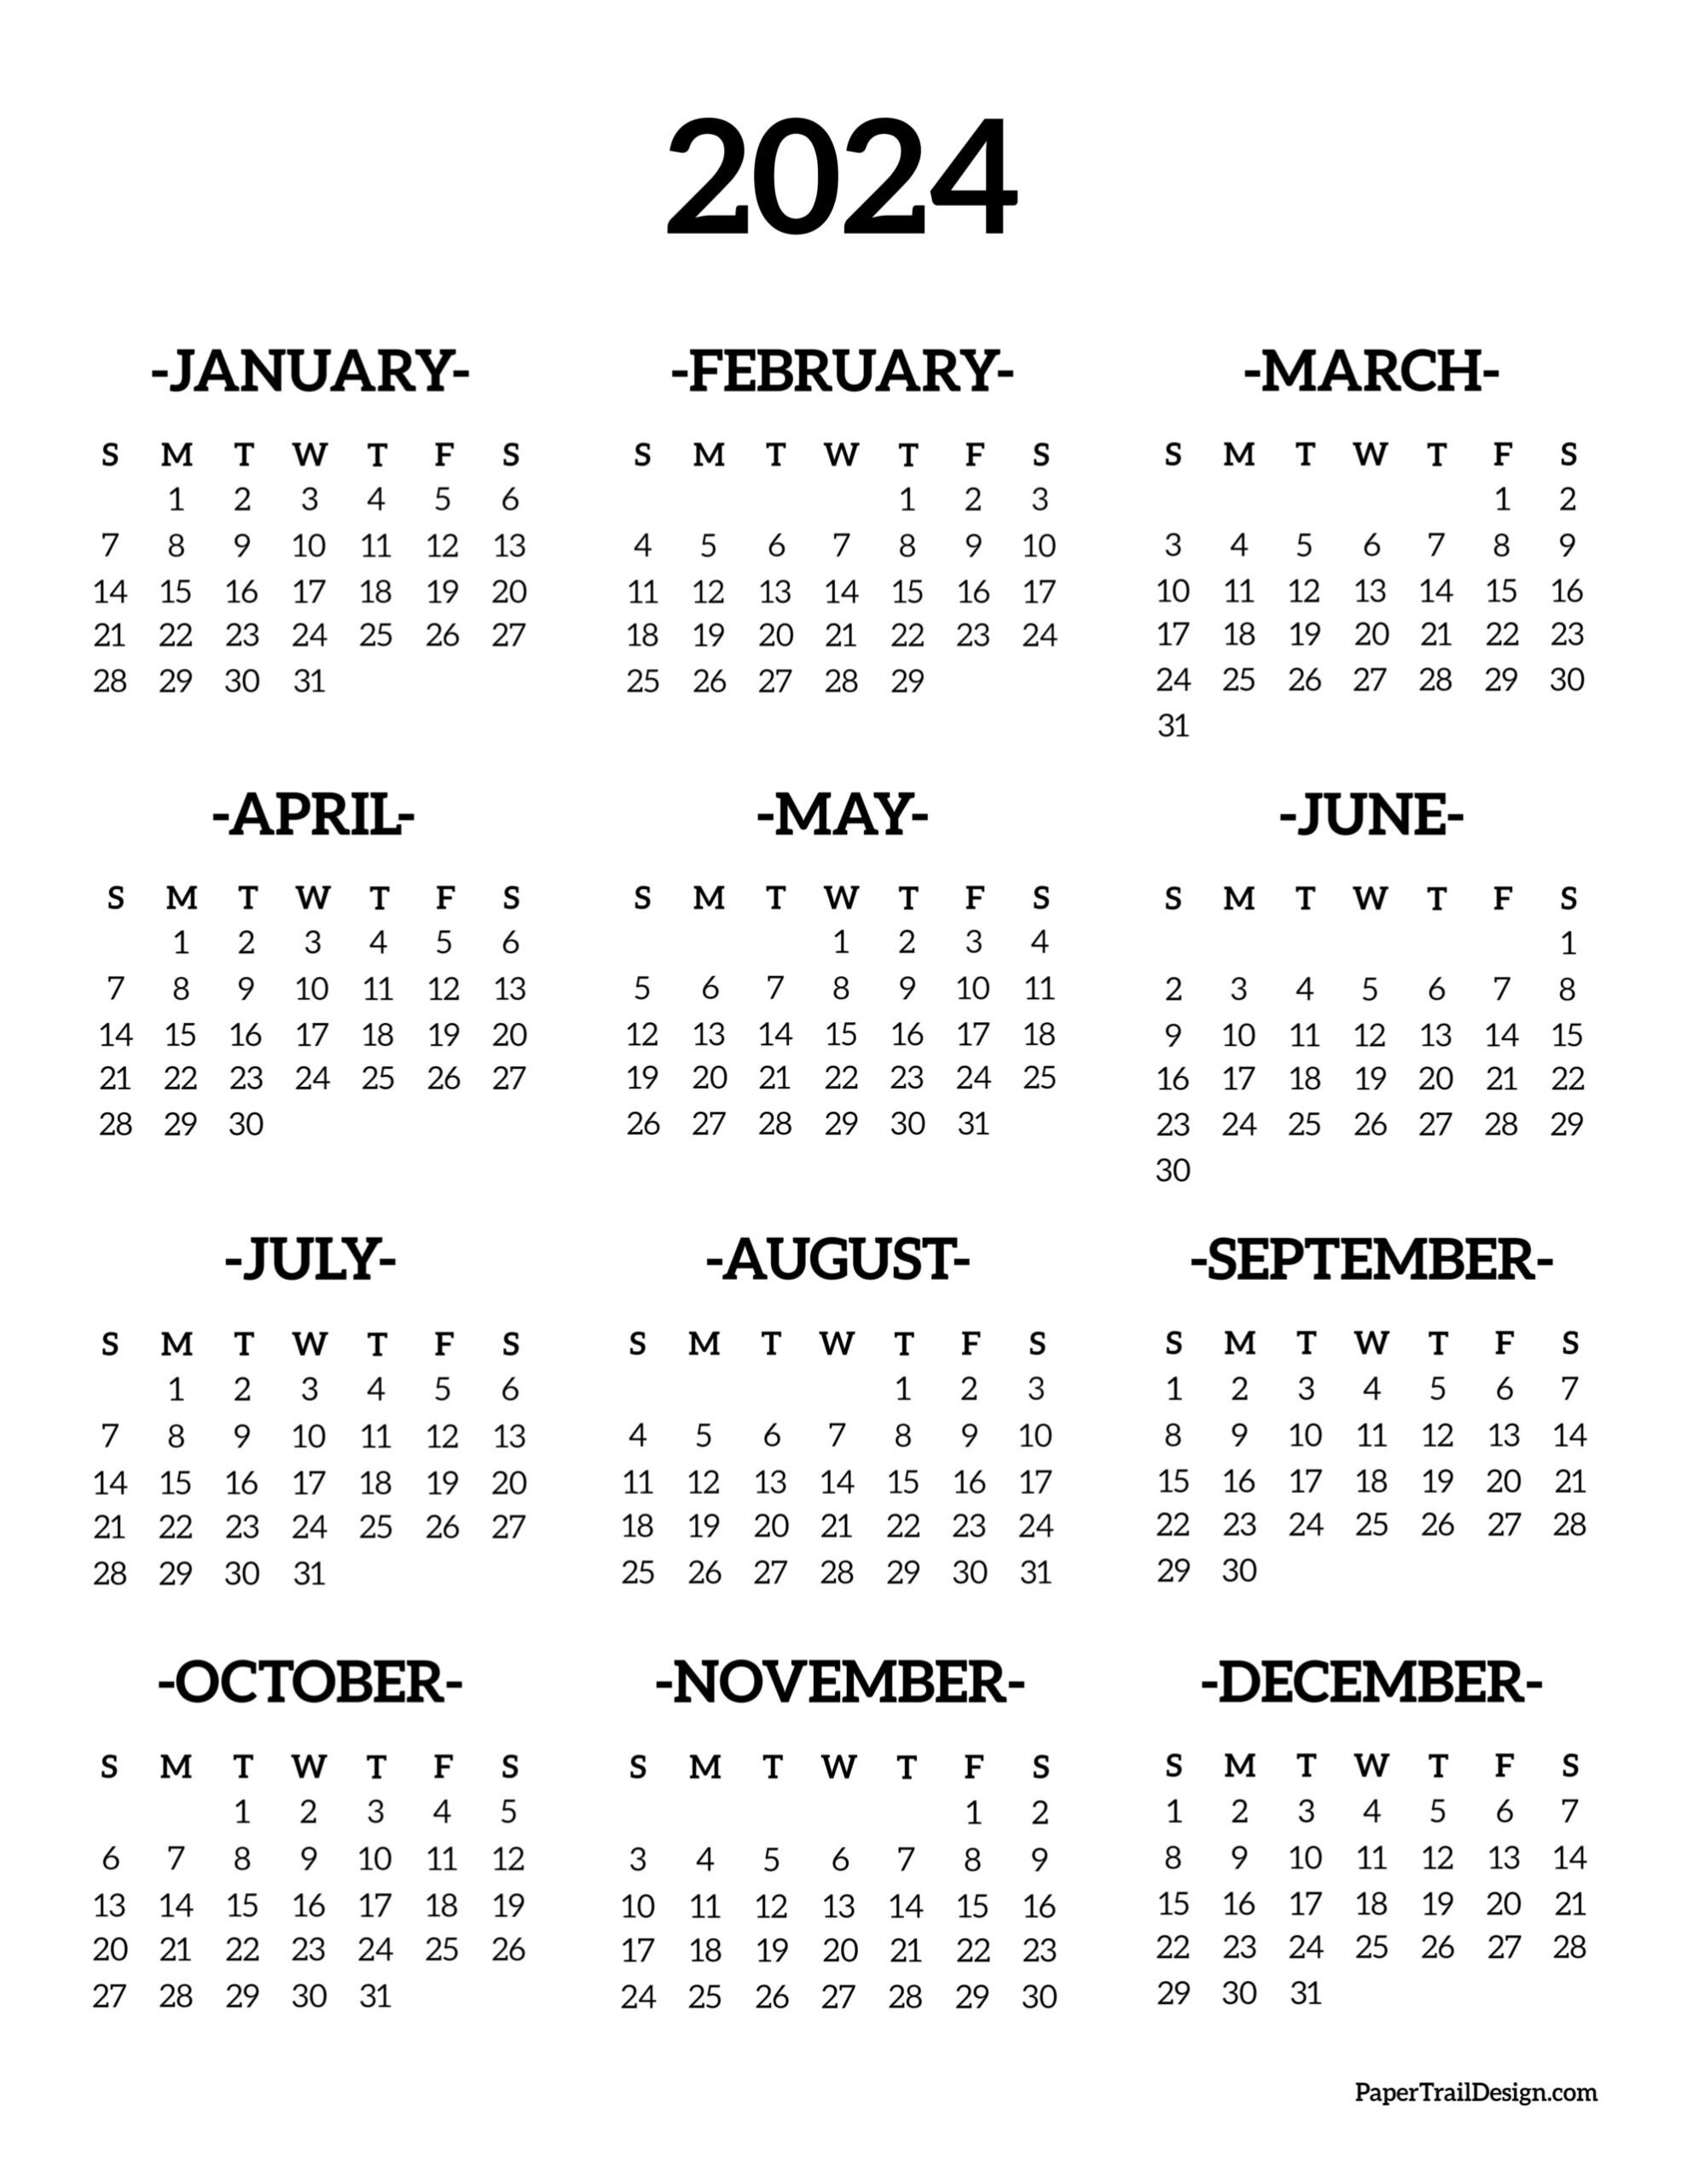 Calendar 2024 Printable One Page - Paper Trail Design regarding Free Printable Calendar 2024 One Page